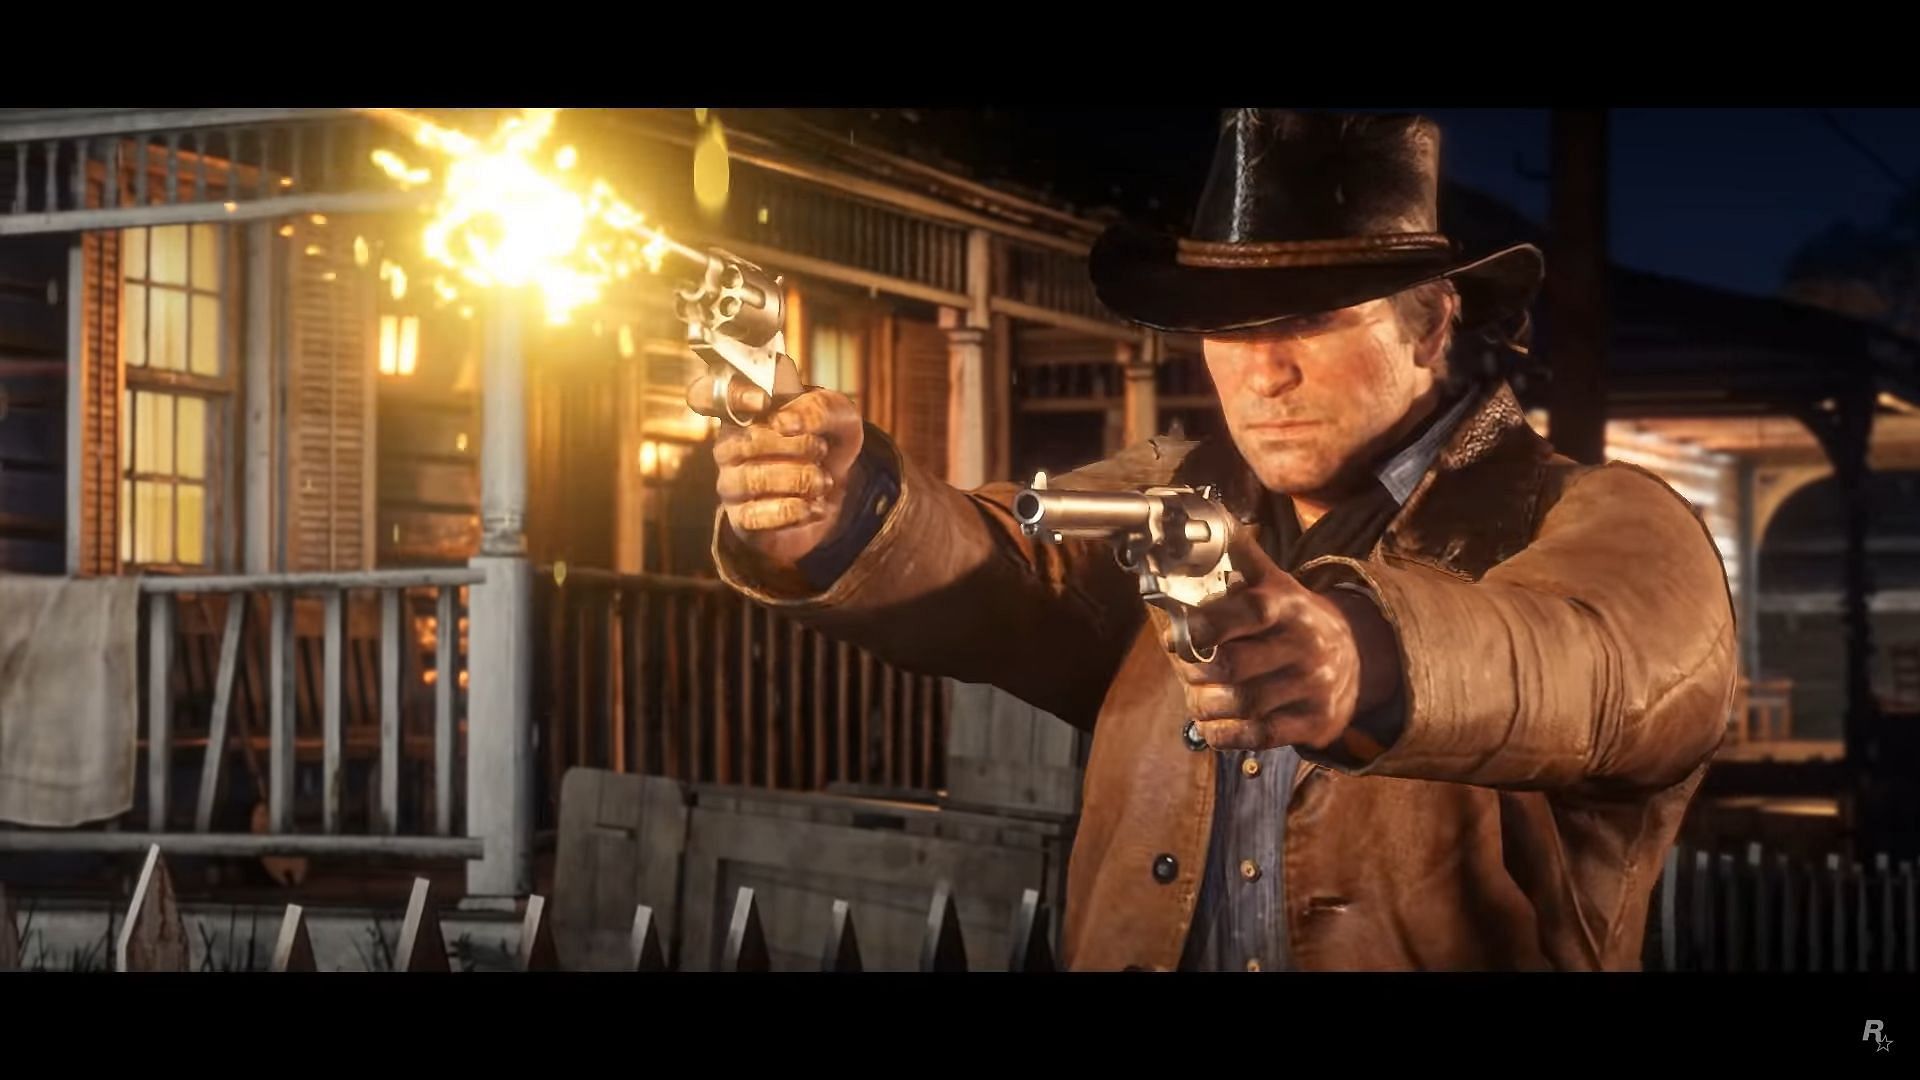 Ready, Aim, Fire (Image via Red Dead Redemption 2)